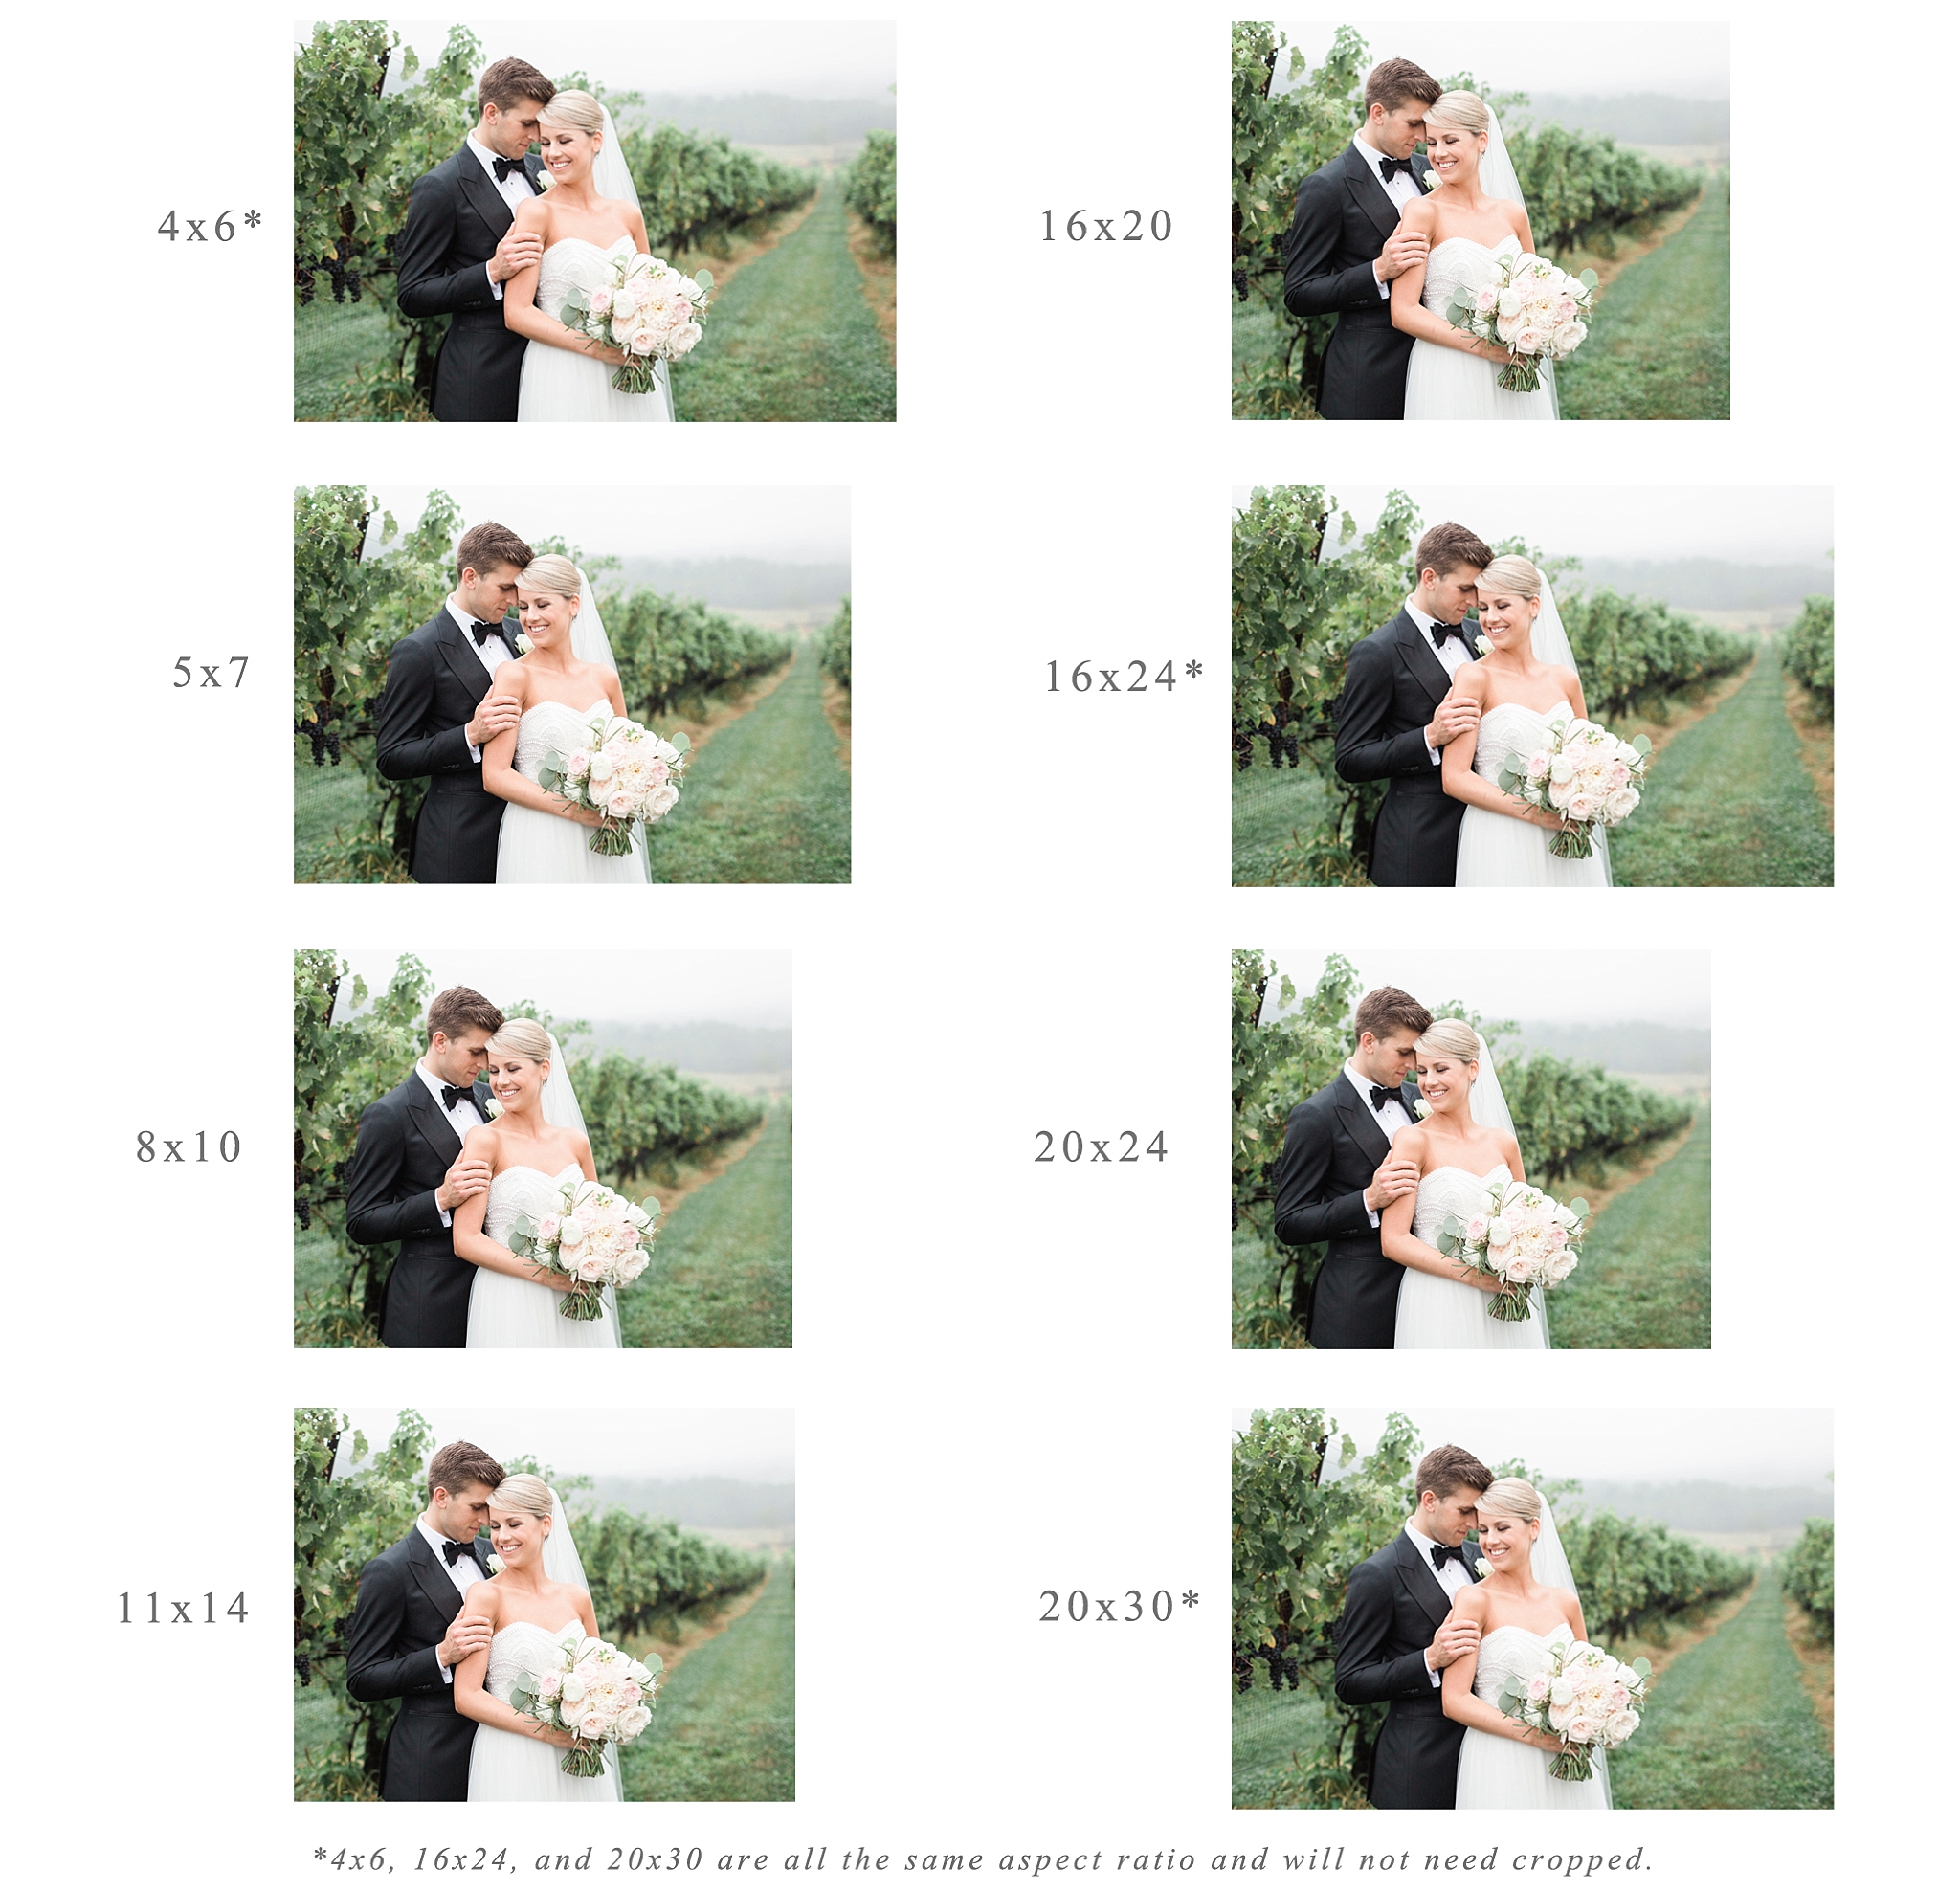 This DC wedding photographer explains exactly what aspect ratio is and how it can affect the overall crop of your image when having photos printed at the lab. 